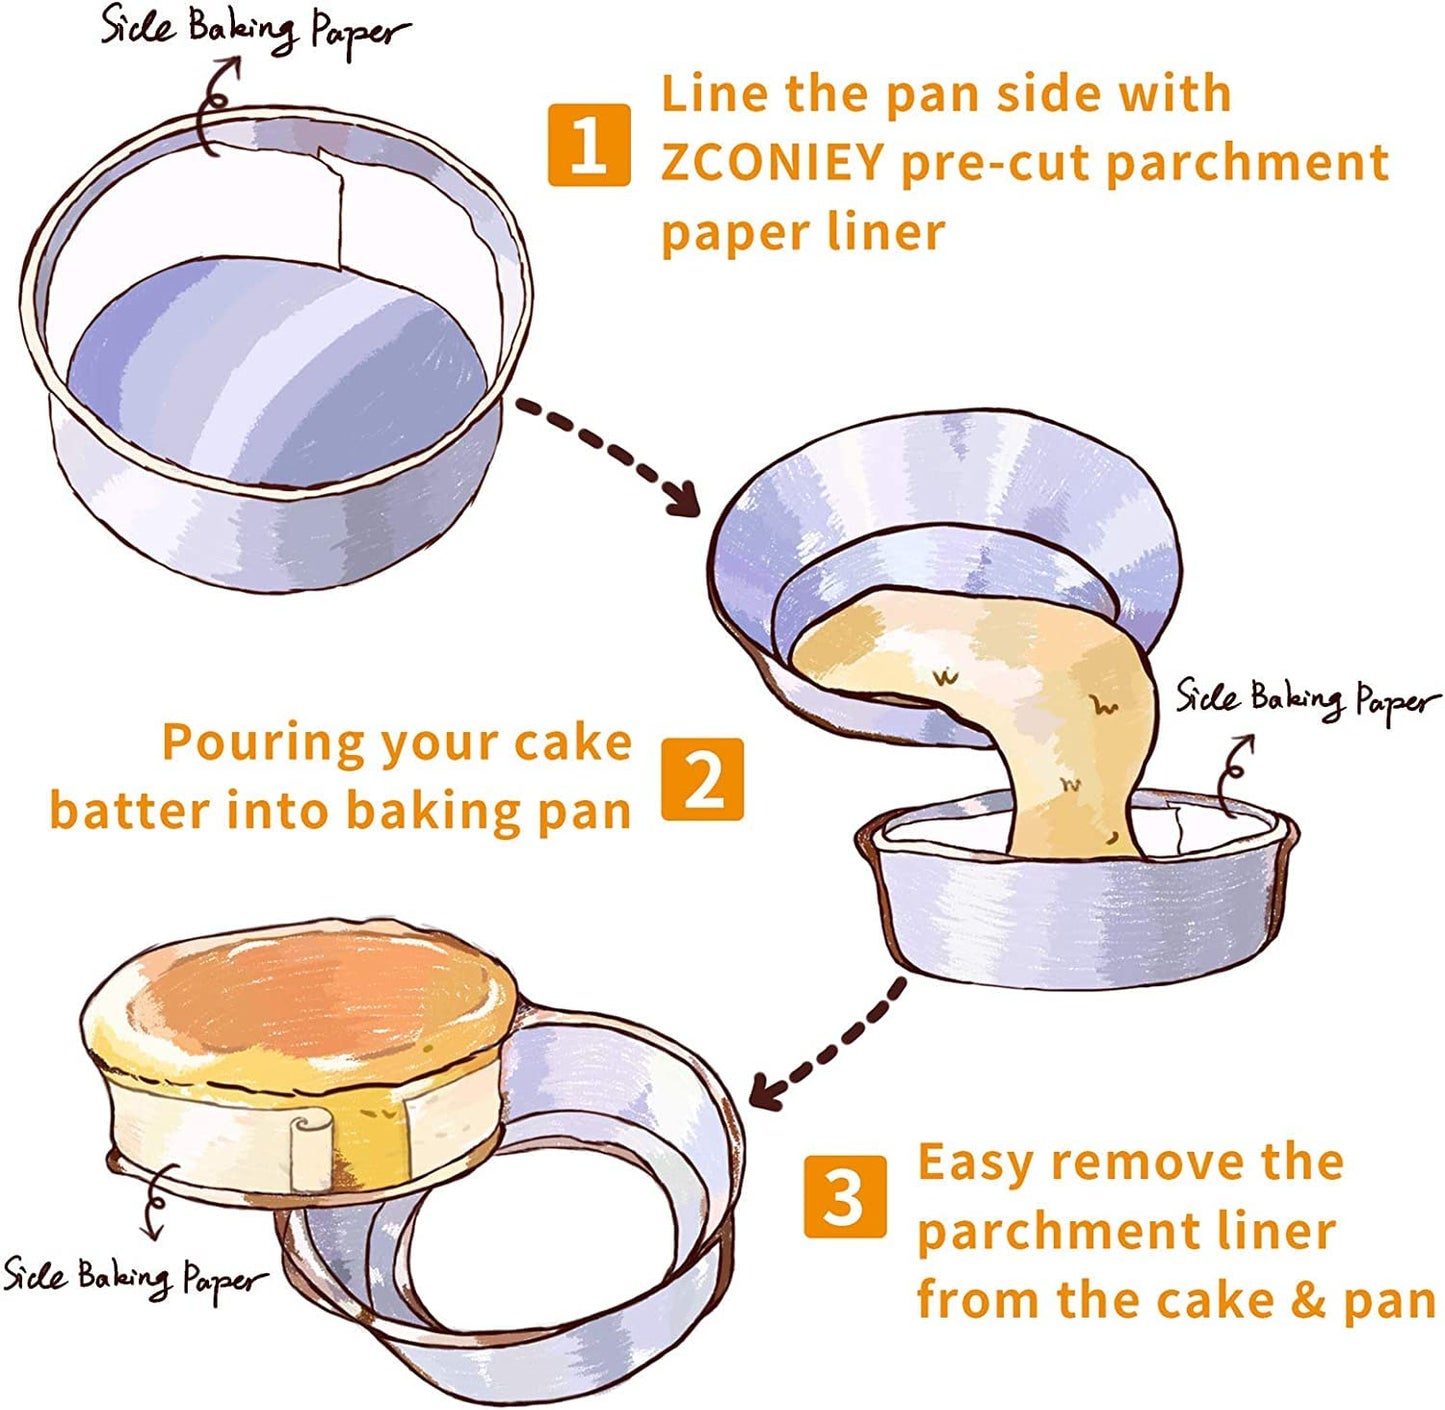 Nonstick Cake Pan Side Liner Baking Parchment Paper Side Liner Roll 4in x 164 ft, Baking Paper, Cake Pan Liner Roll Baking Pan Side Liner(2 pieces)